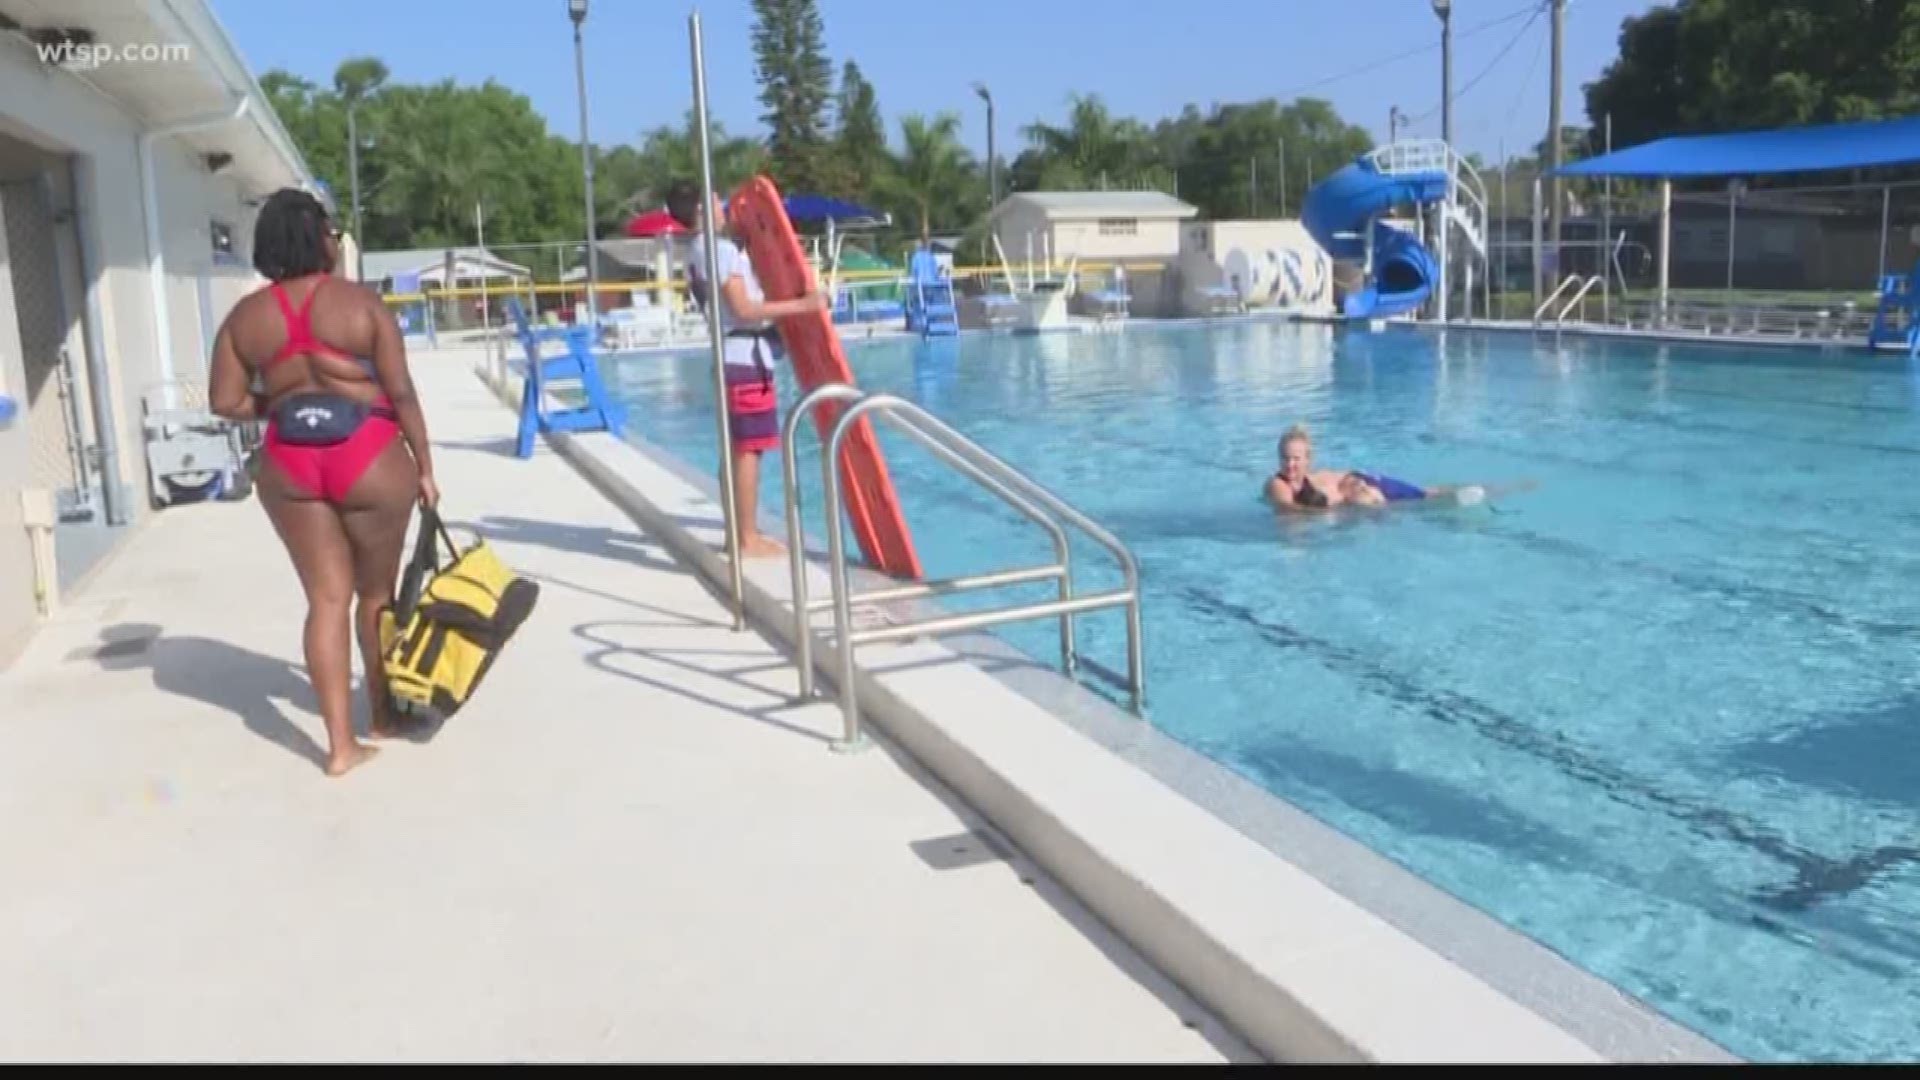 Pinellas Park Fire Department getting lifesaving training for potential drownings